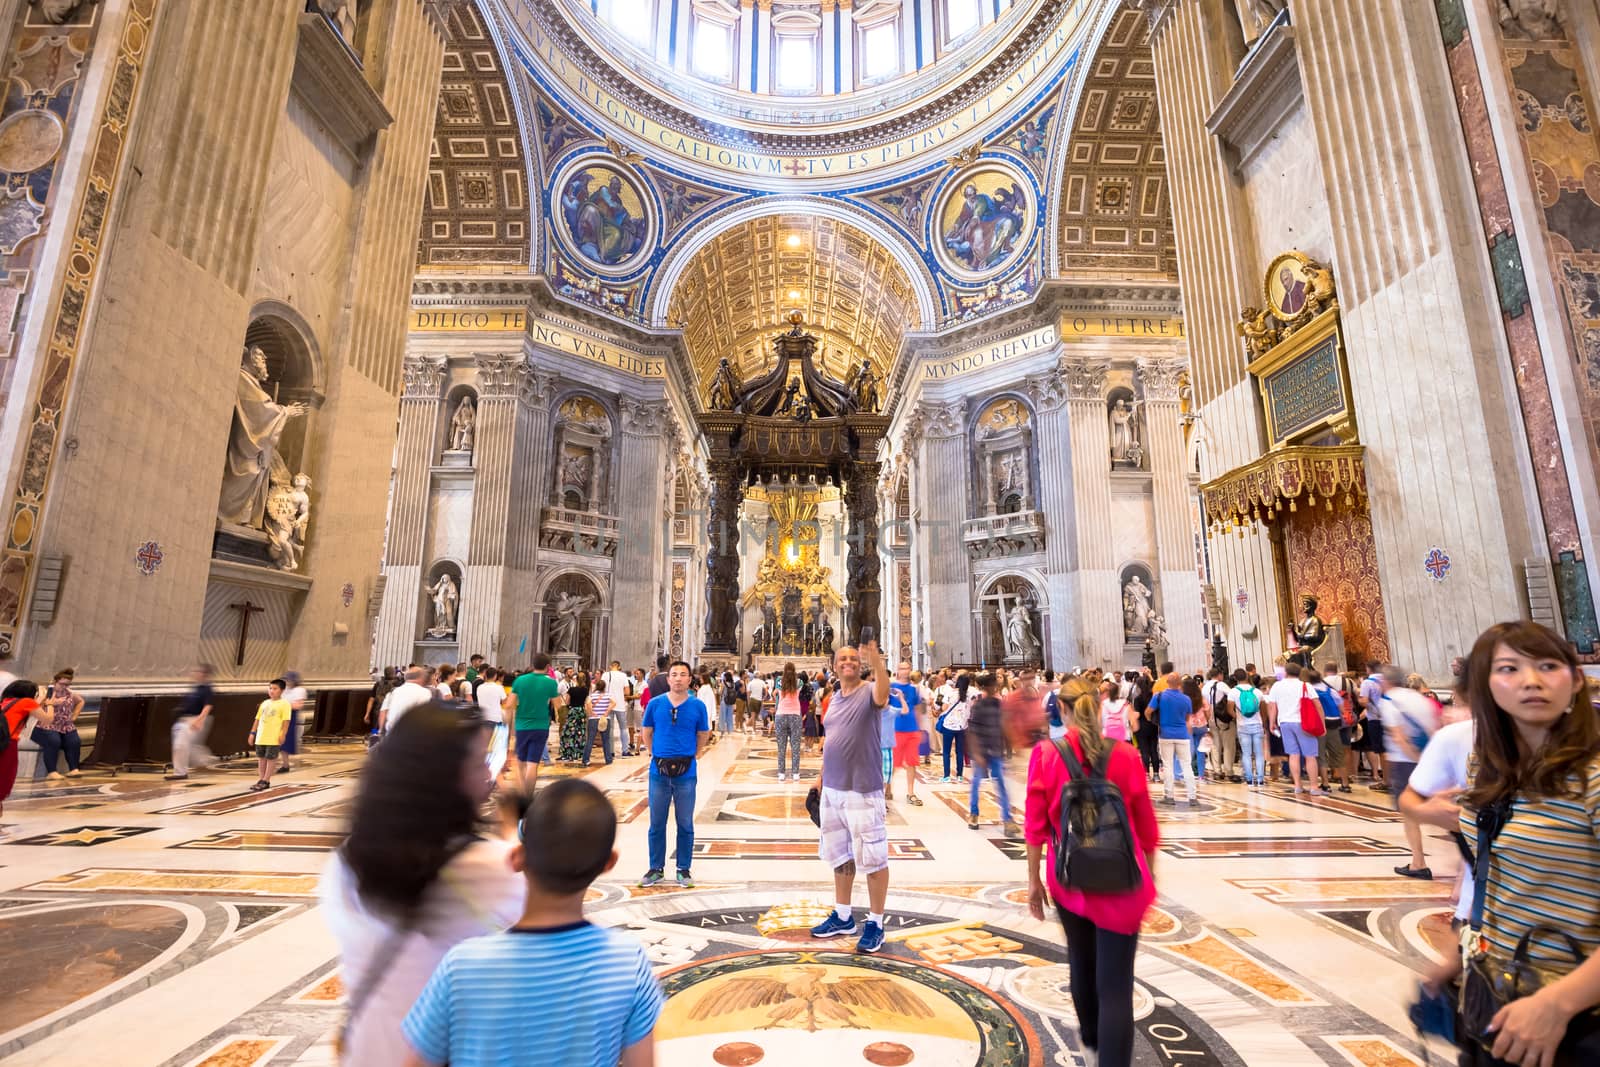 Over-tourism in Saint Peter Basilica, Vatican State by Perseomedusa